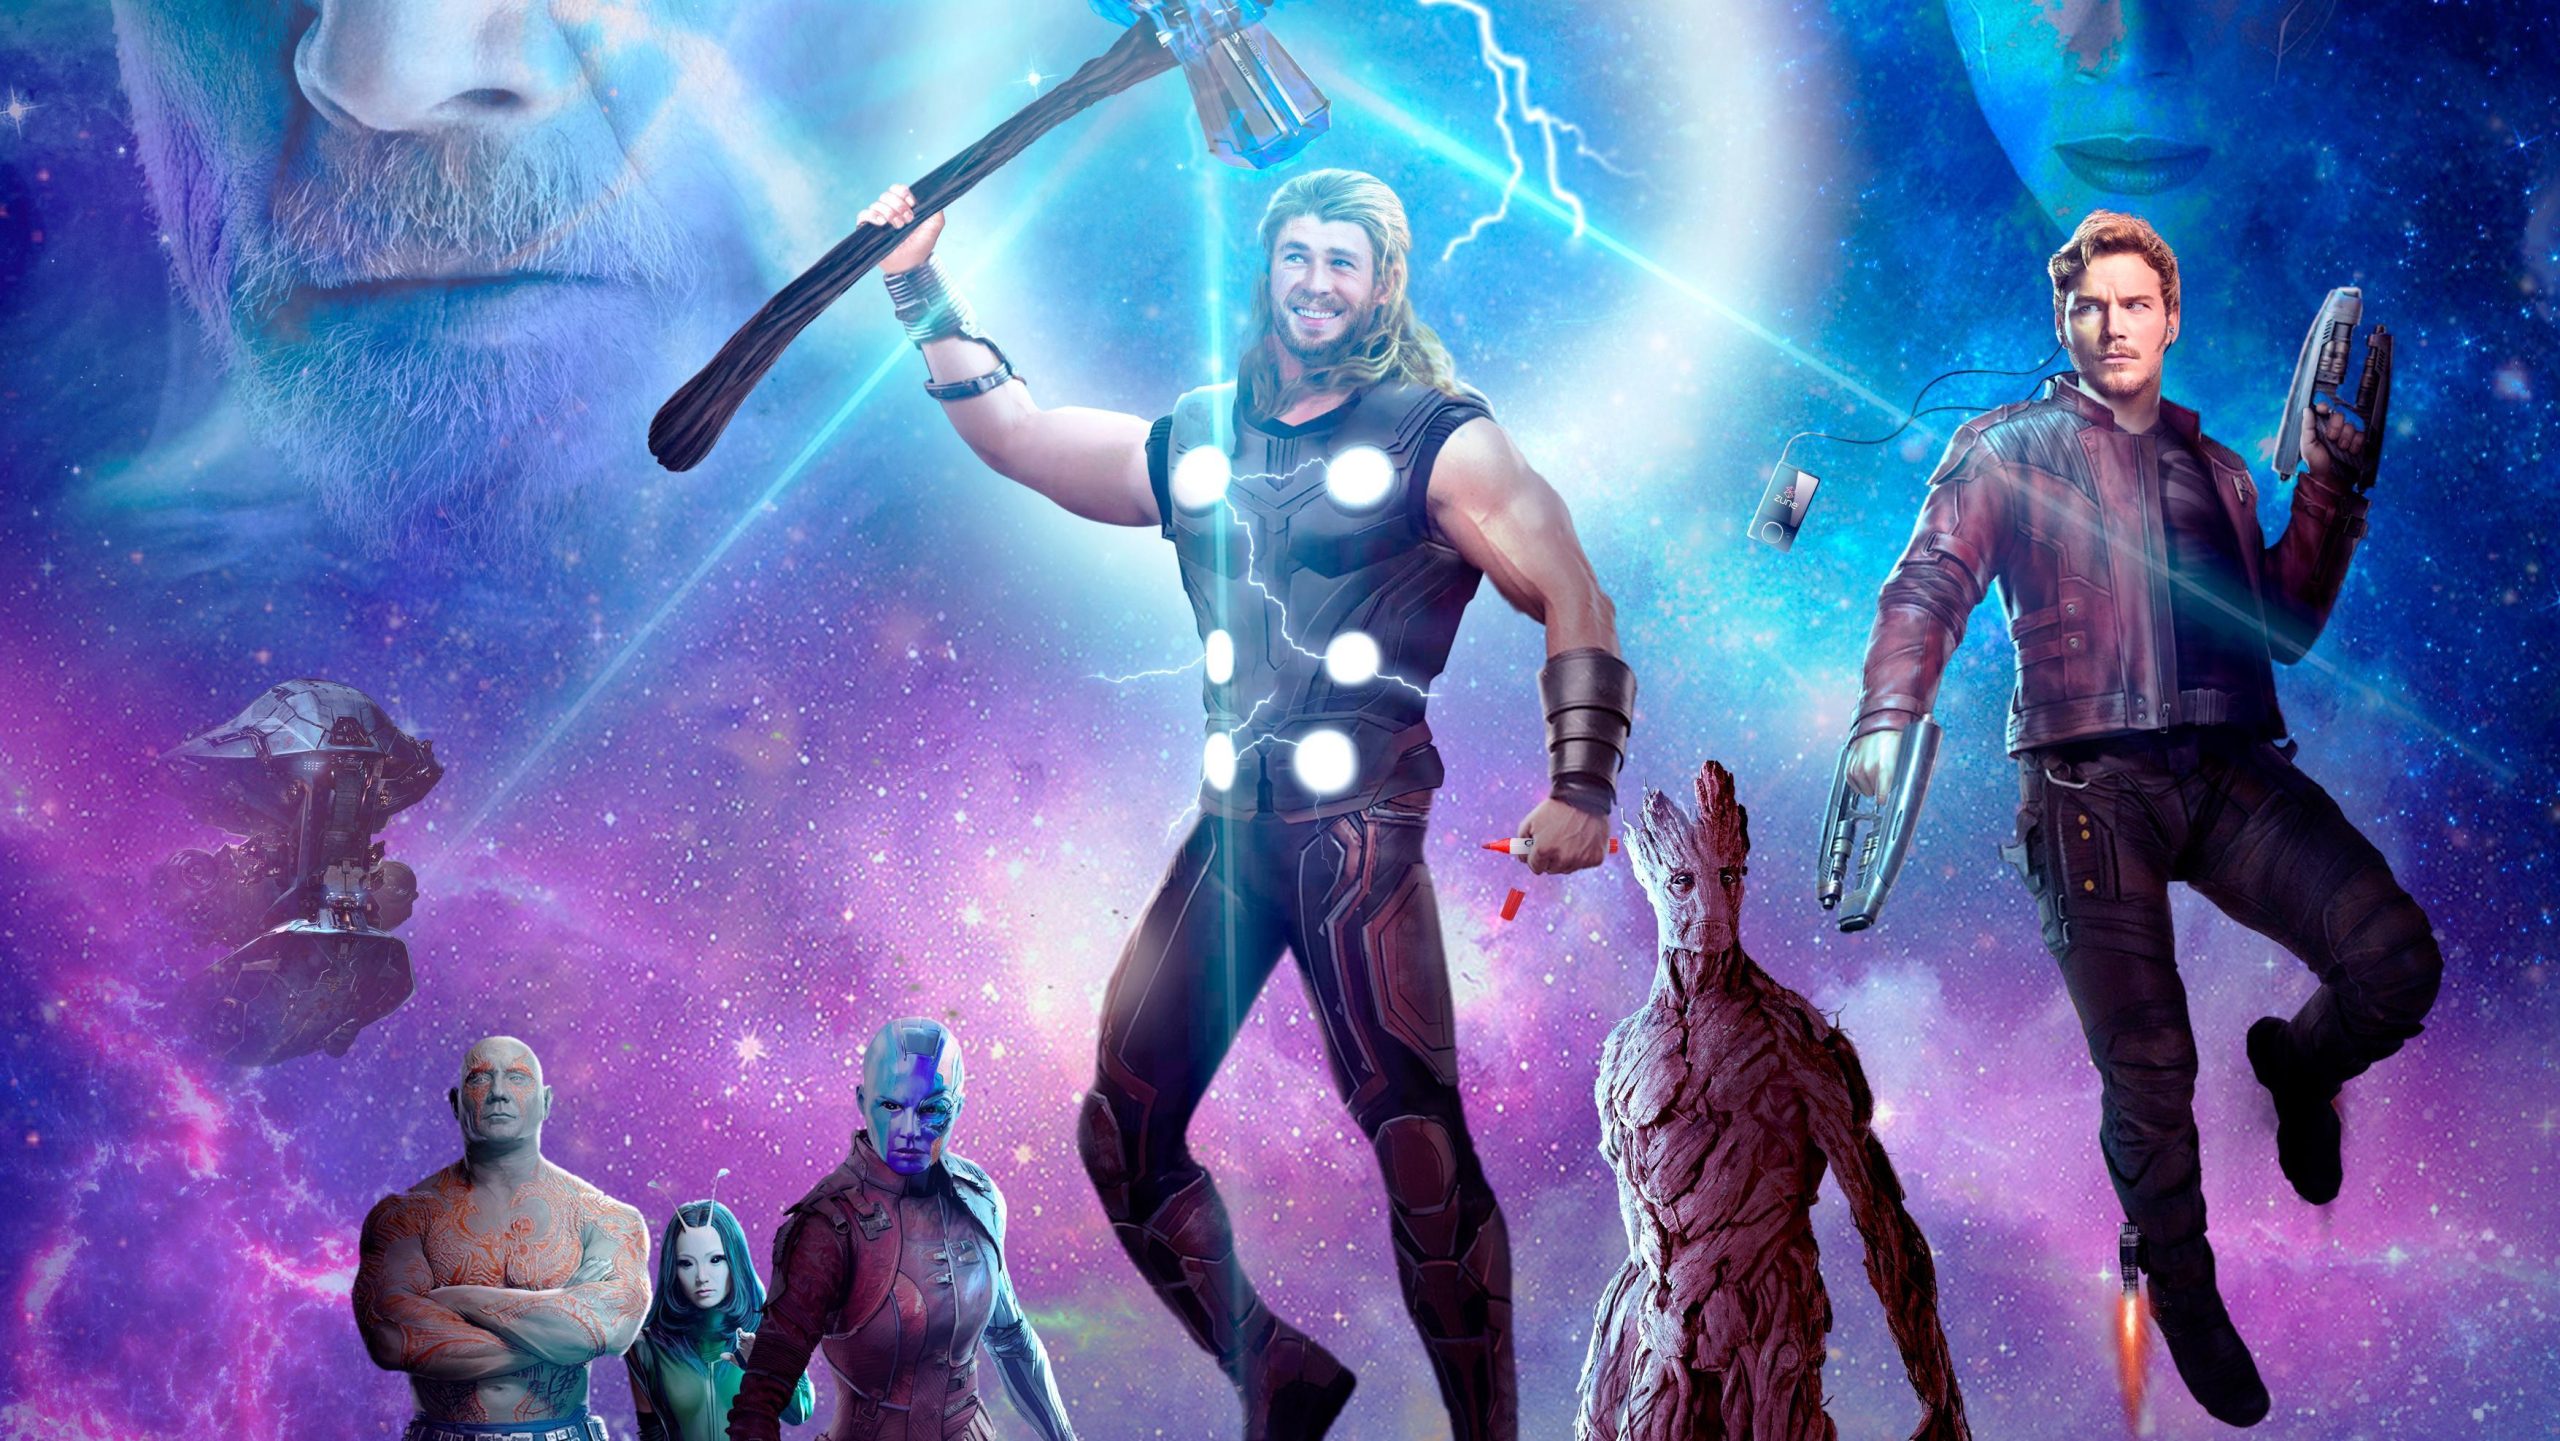 Guardians Of The Galaxy Videogame Wallpaper For Ipad, Guardians Of The Galaxy Videogame, Movies